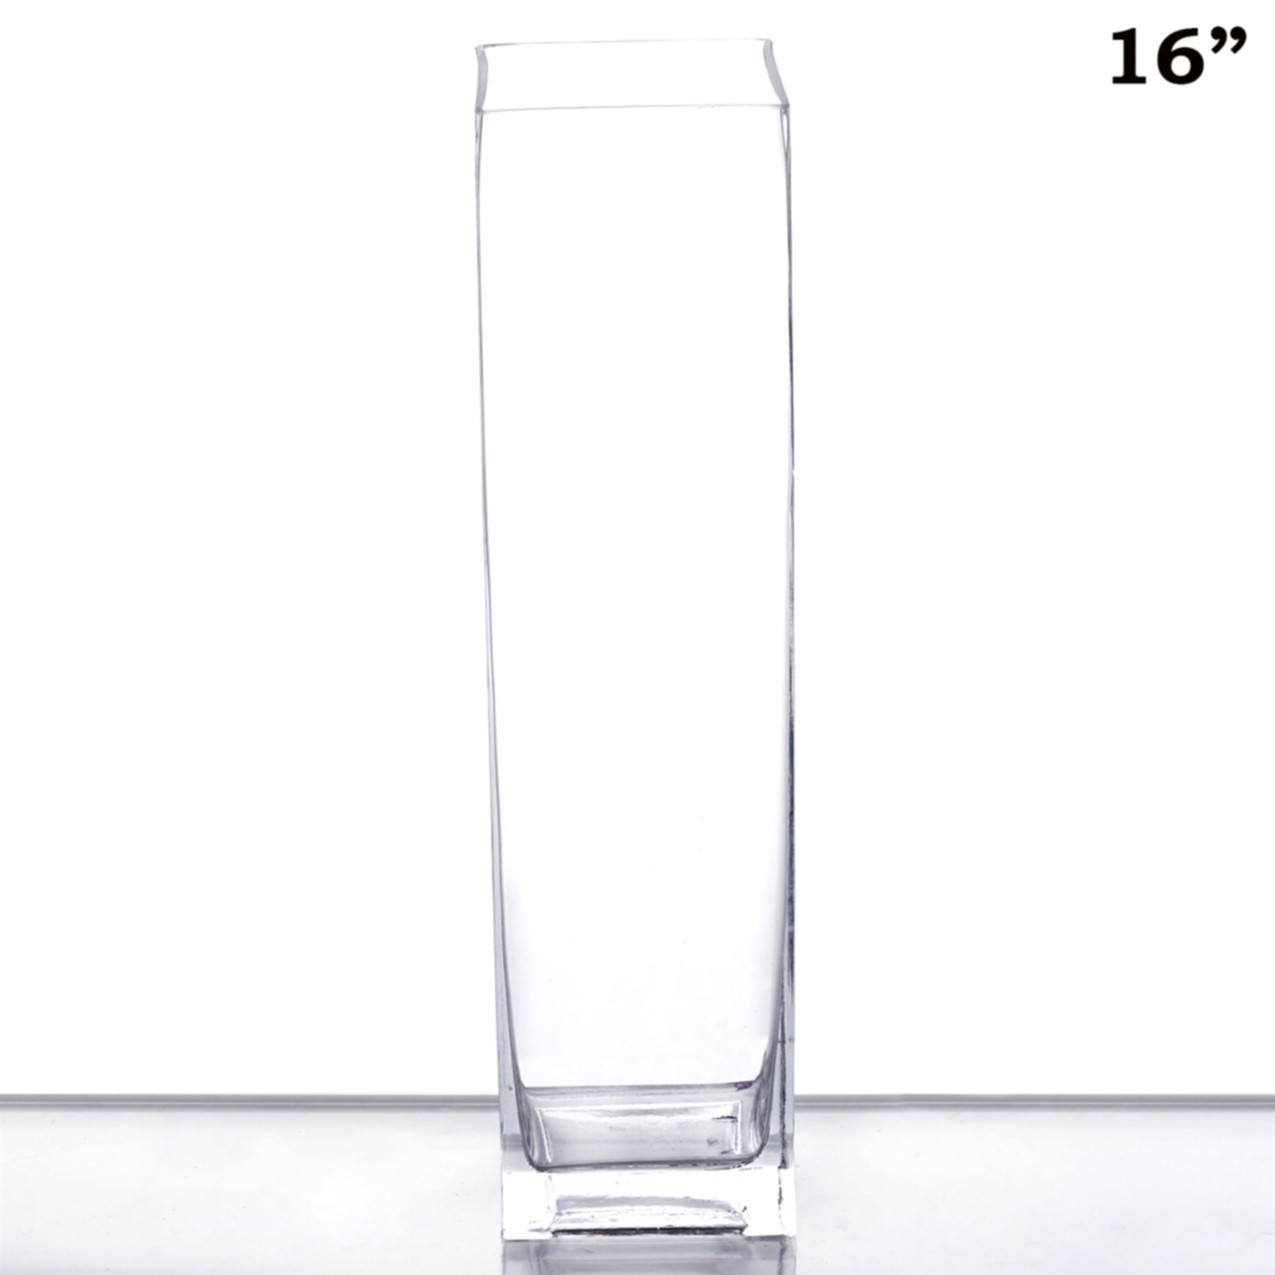 19 Stunning 8 Square Glass Vase 2024 free download 8 square glass vase of square glass vase lucky lady engraving square glass vases vase pertaining to square glass vase lucky lady engraving square glass vases pictures